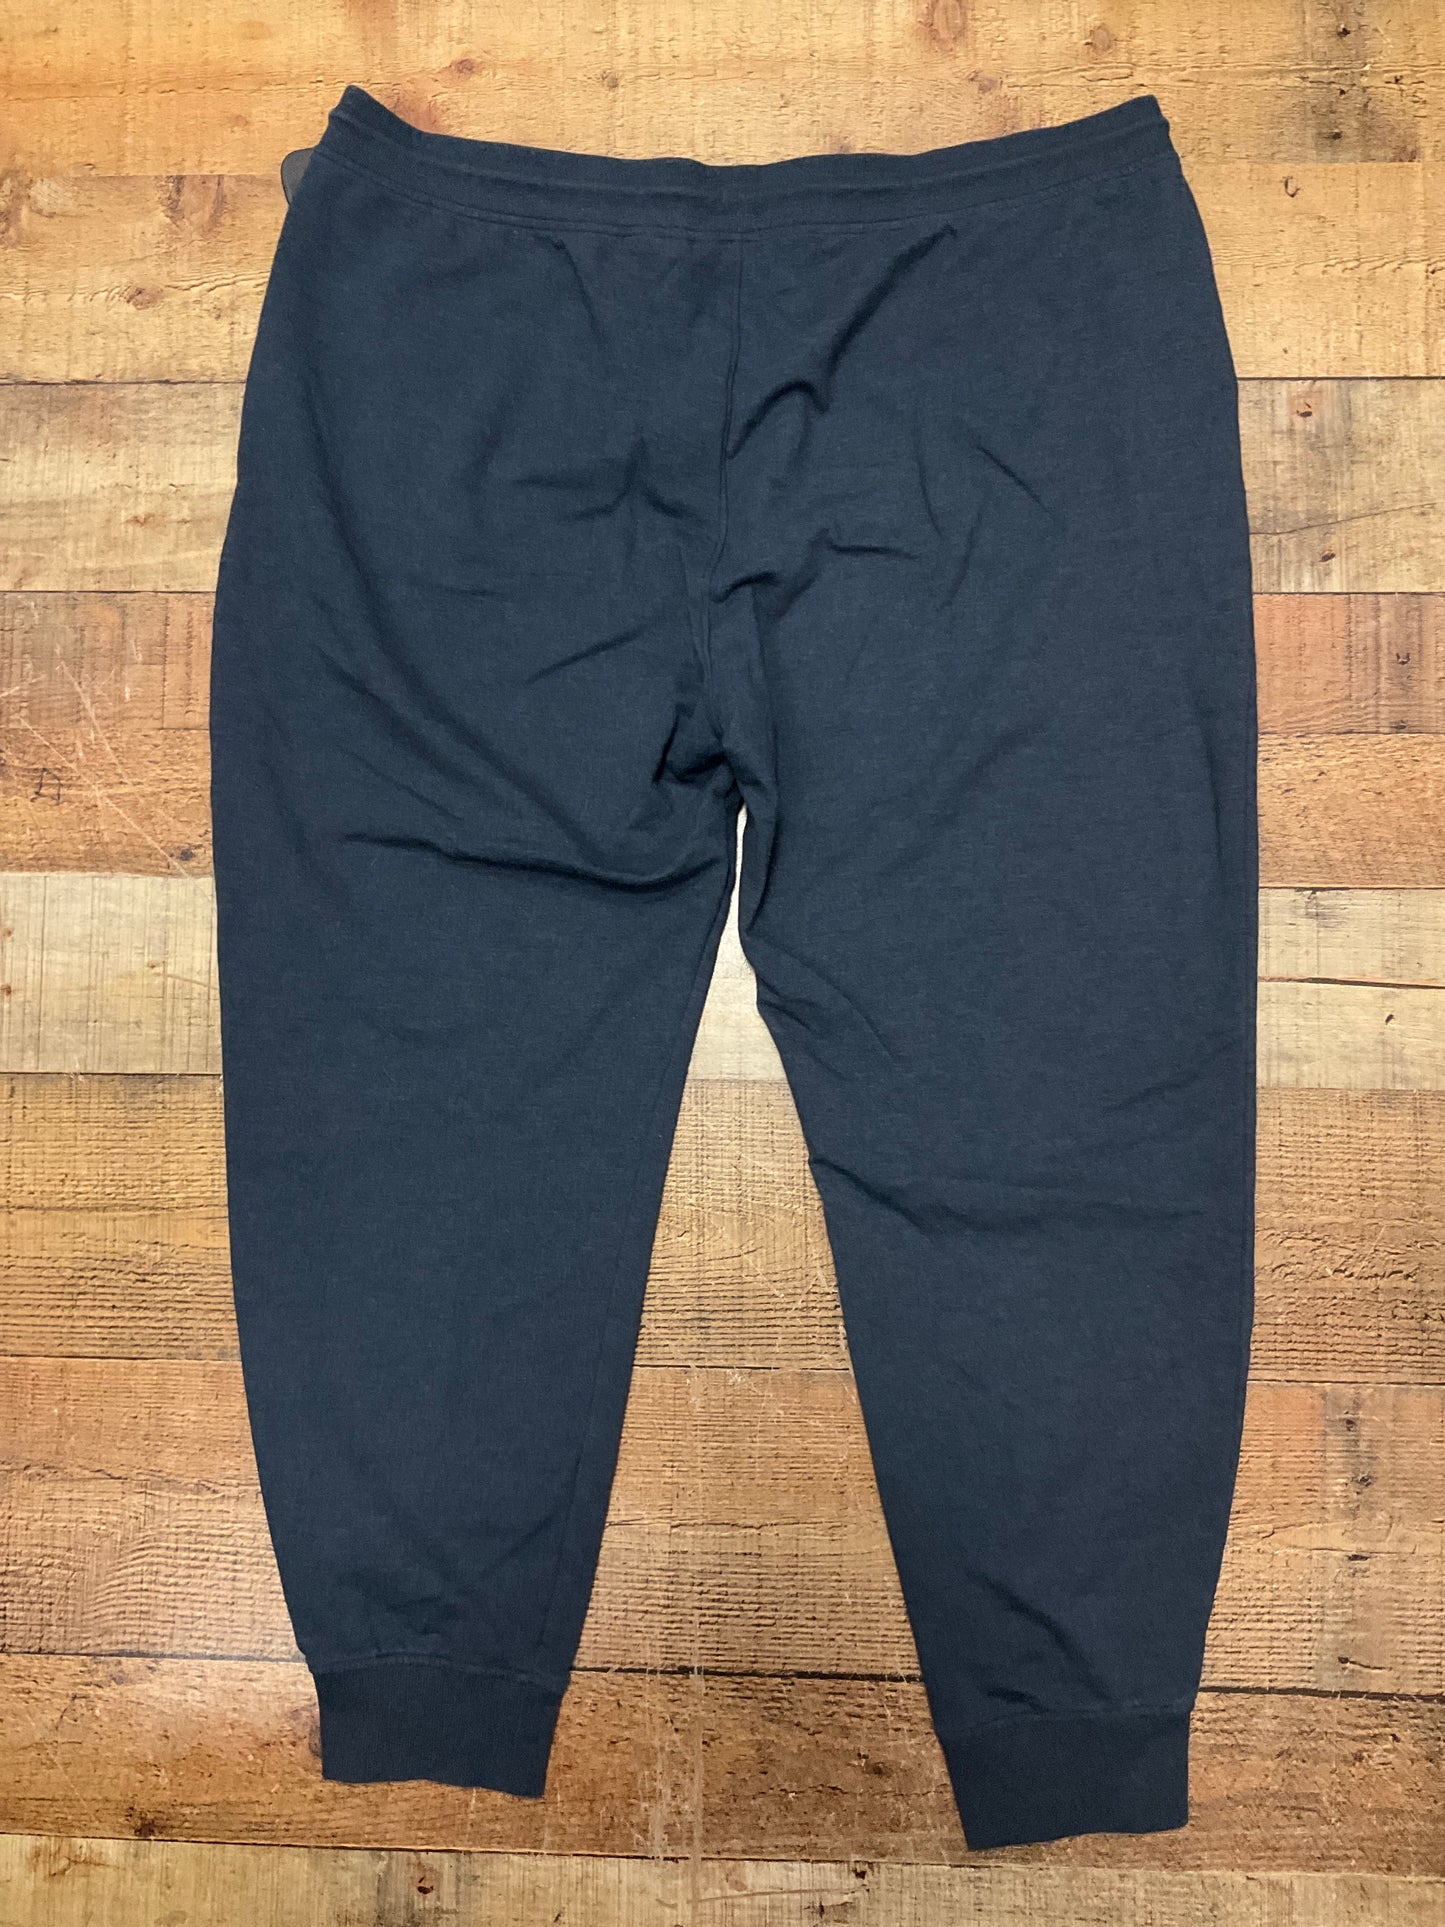 Athletic Pants By Eddie Bauer  Size: Xl